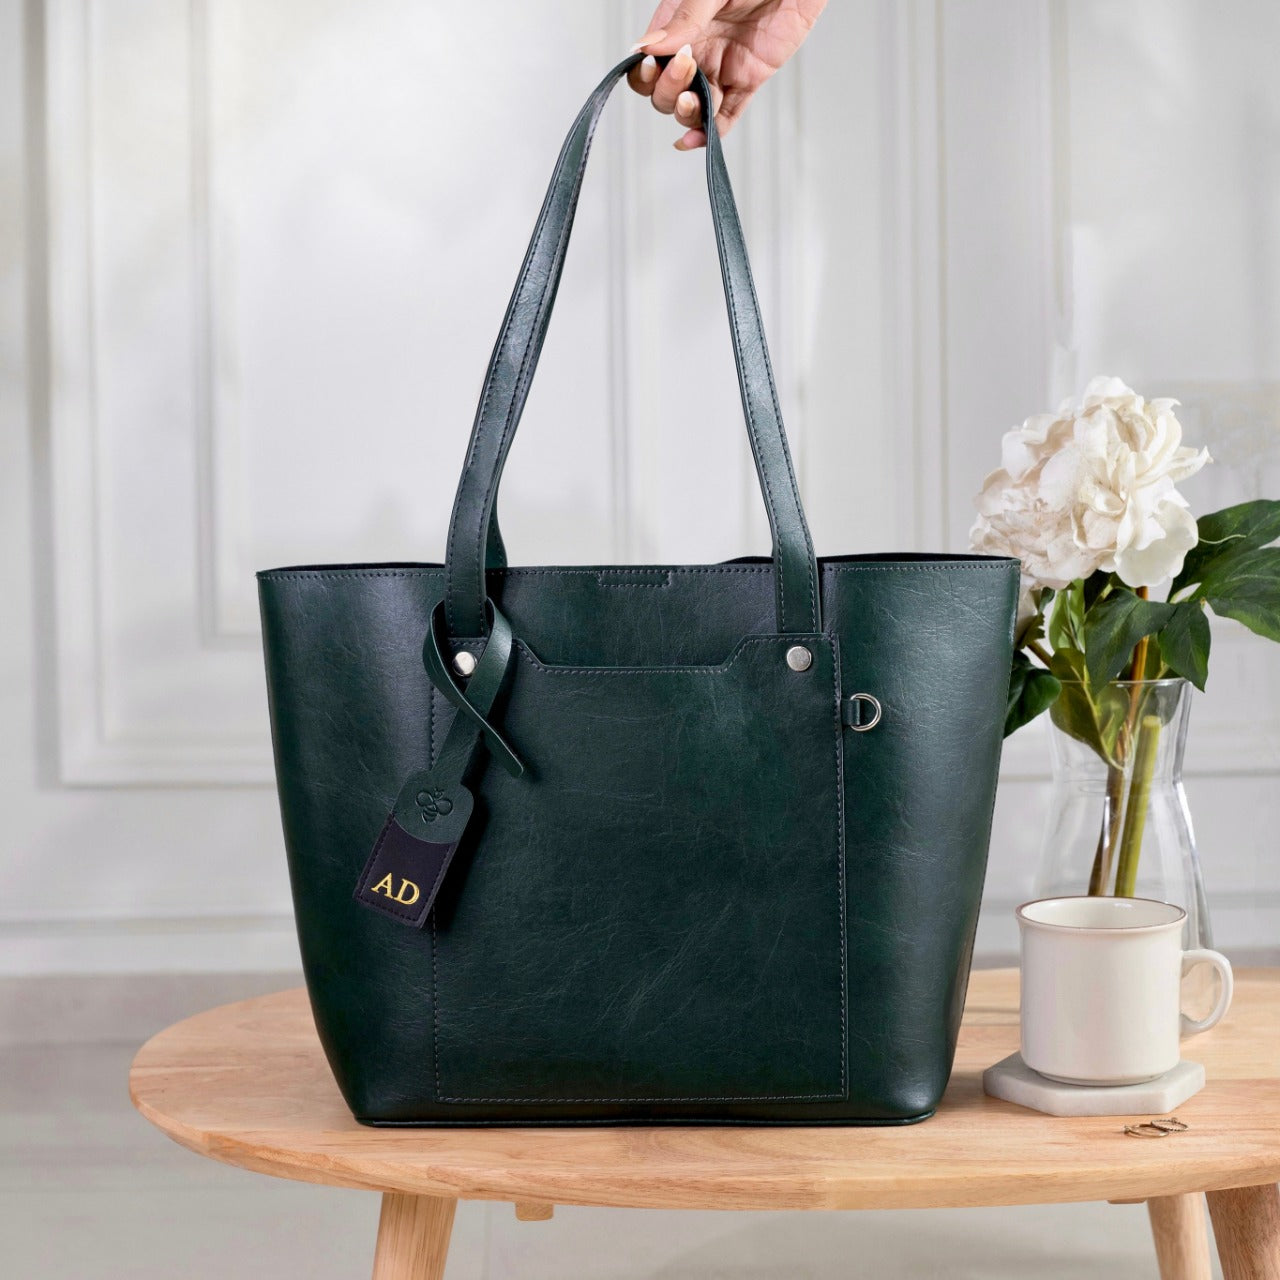 Best Tote Bags For Women Personalised In Green Colour Online